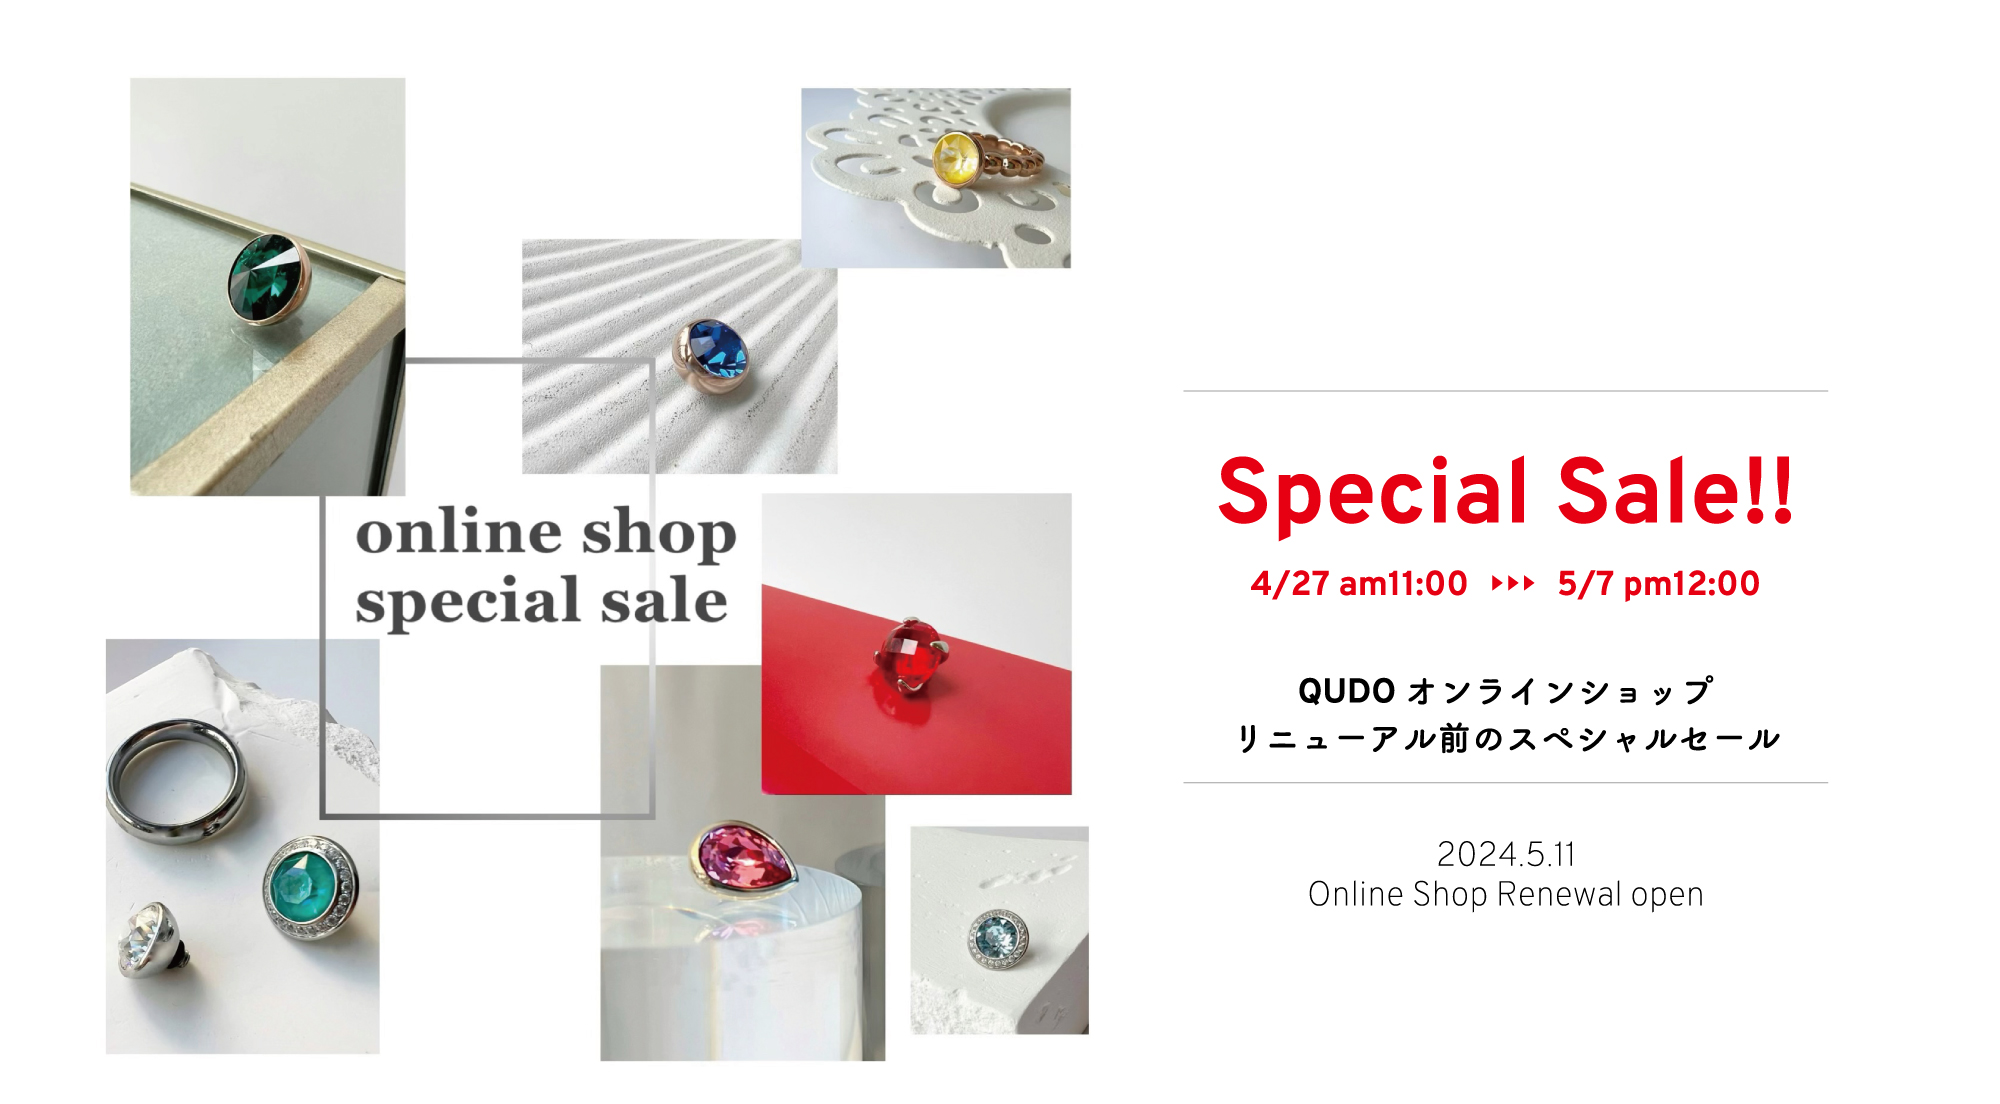 ☆ special sale ☆ 4/27 am 11時スタート！！